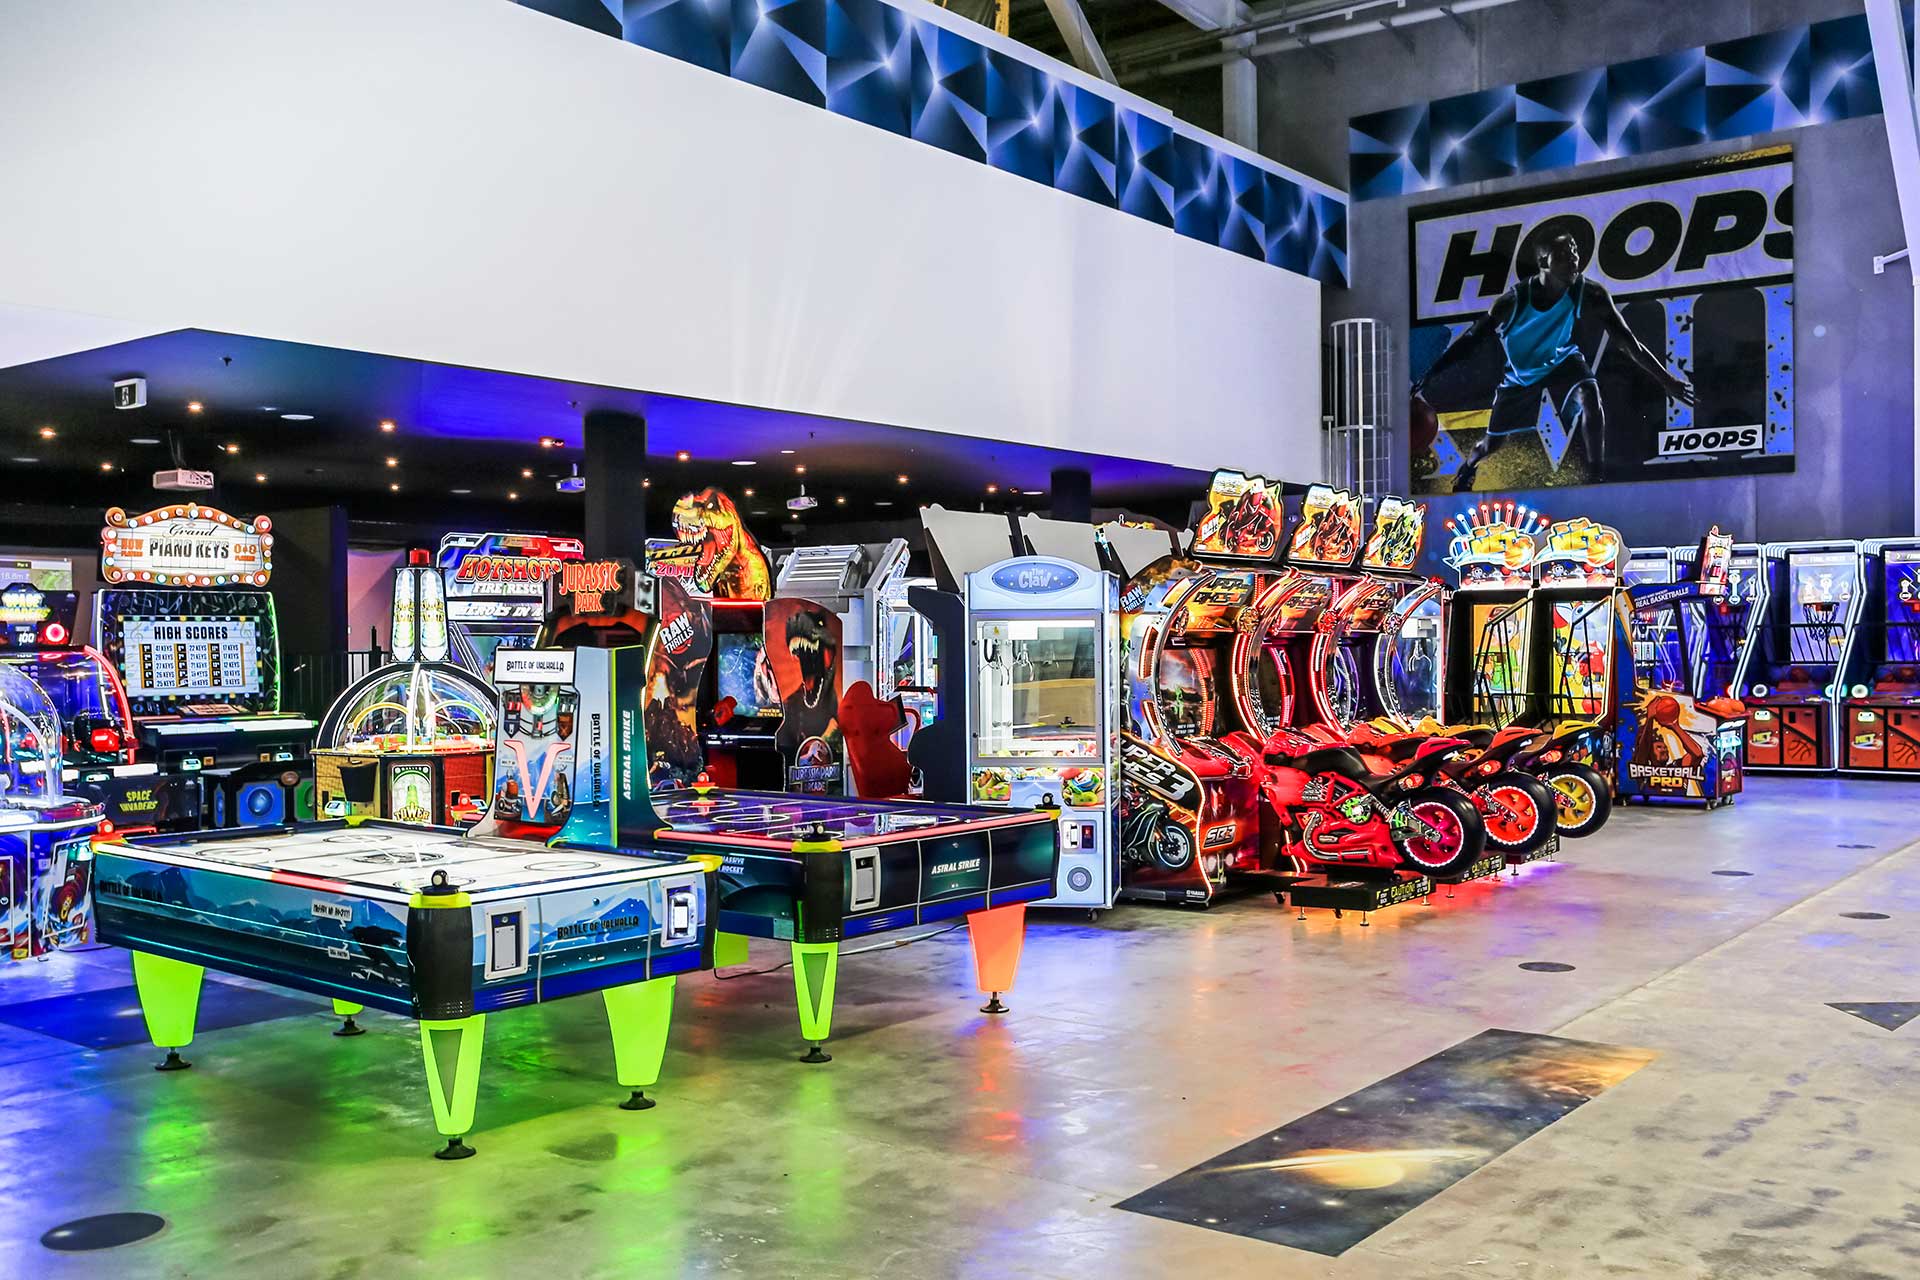 Arena Entertainment is the ultimate destination for quality, affordable entertainment for the whole family so step into our arcade, let the magic begin and watch the time fly by!